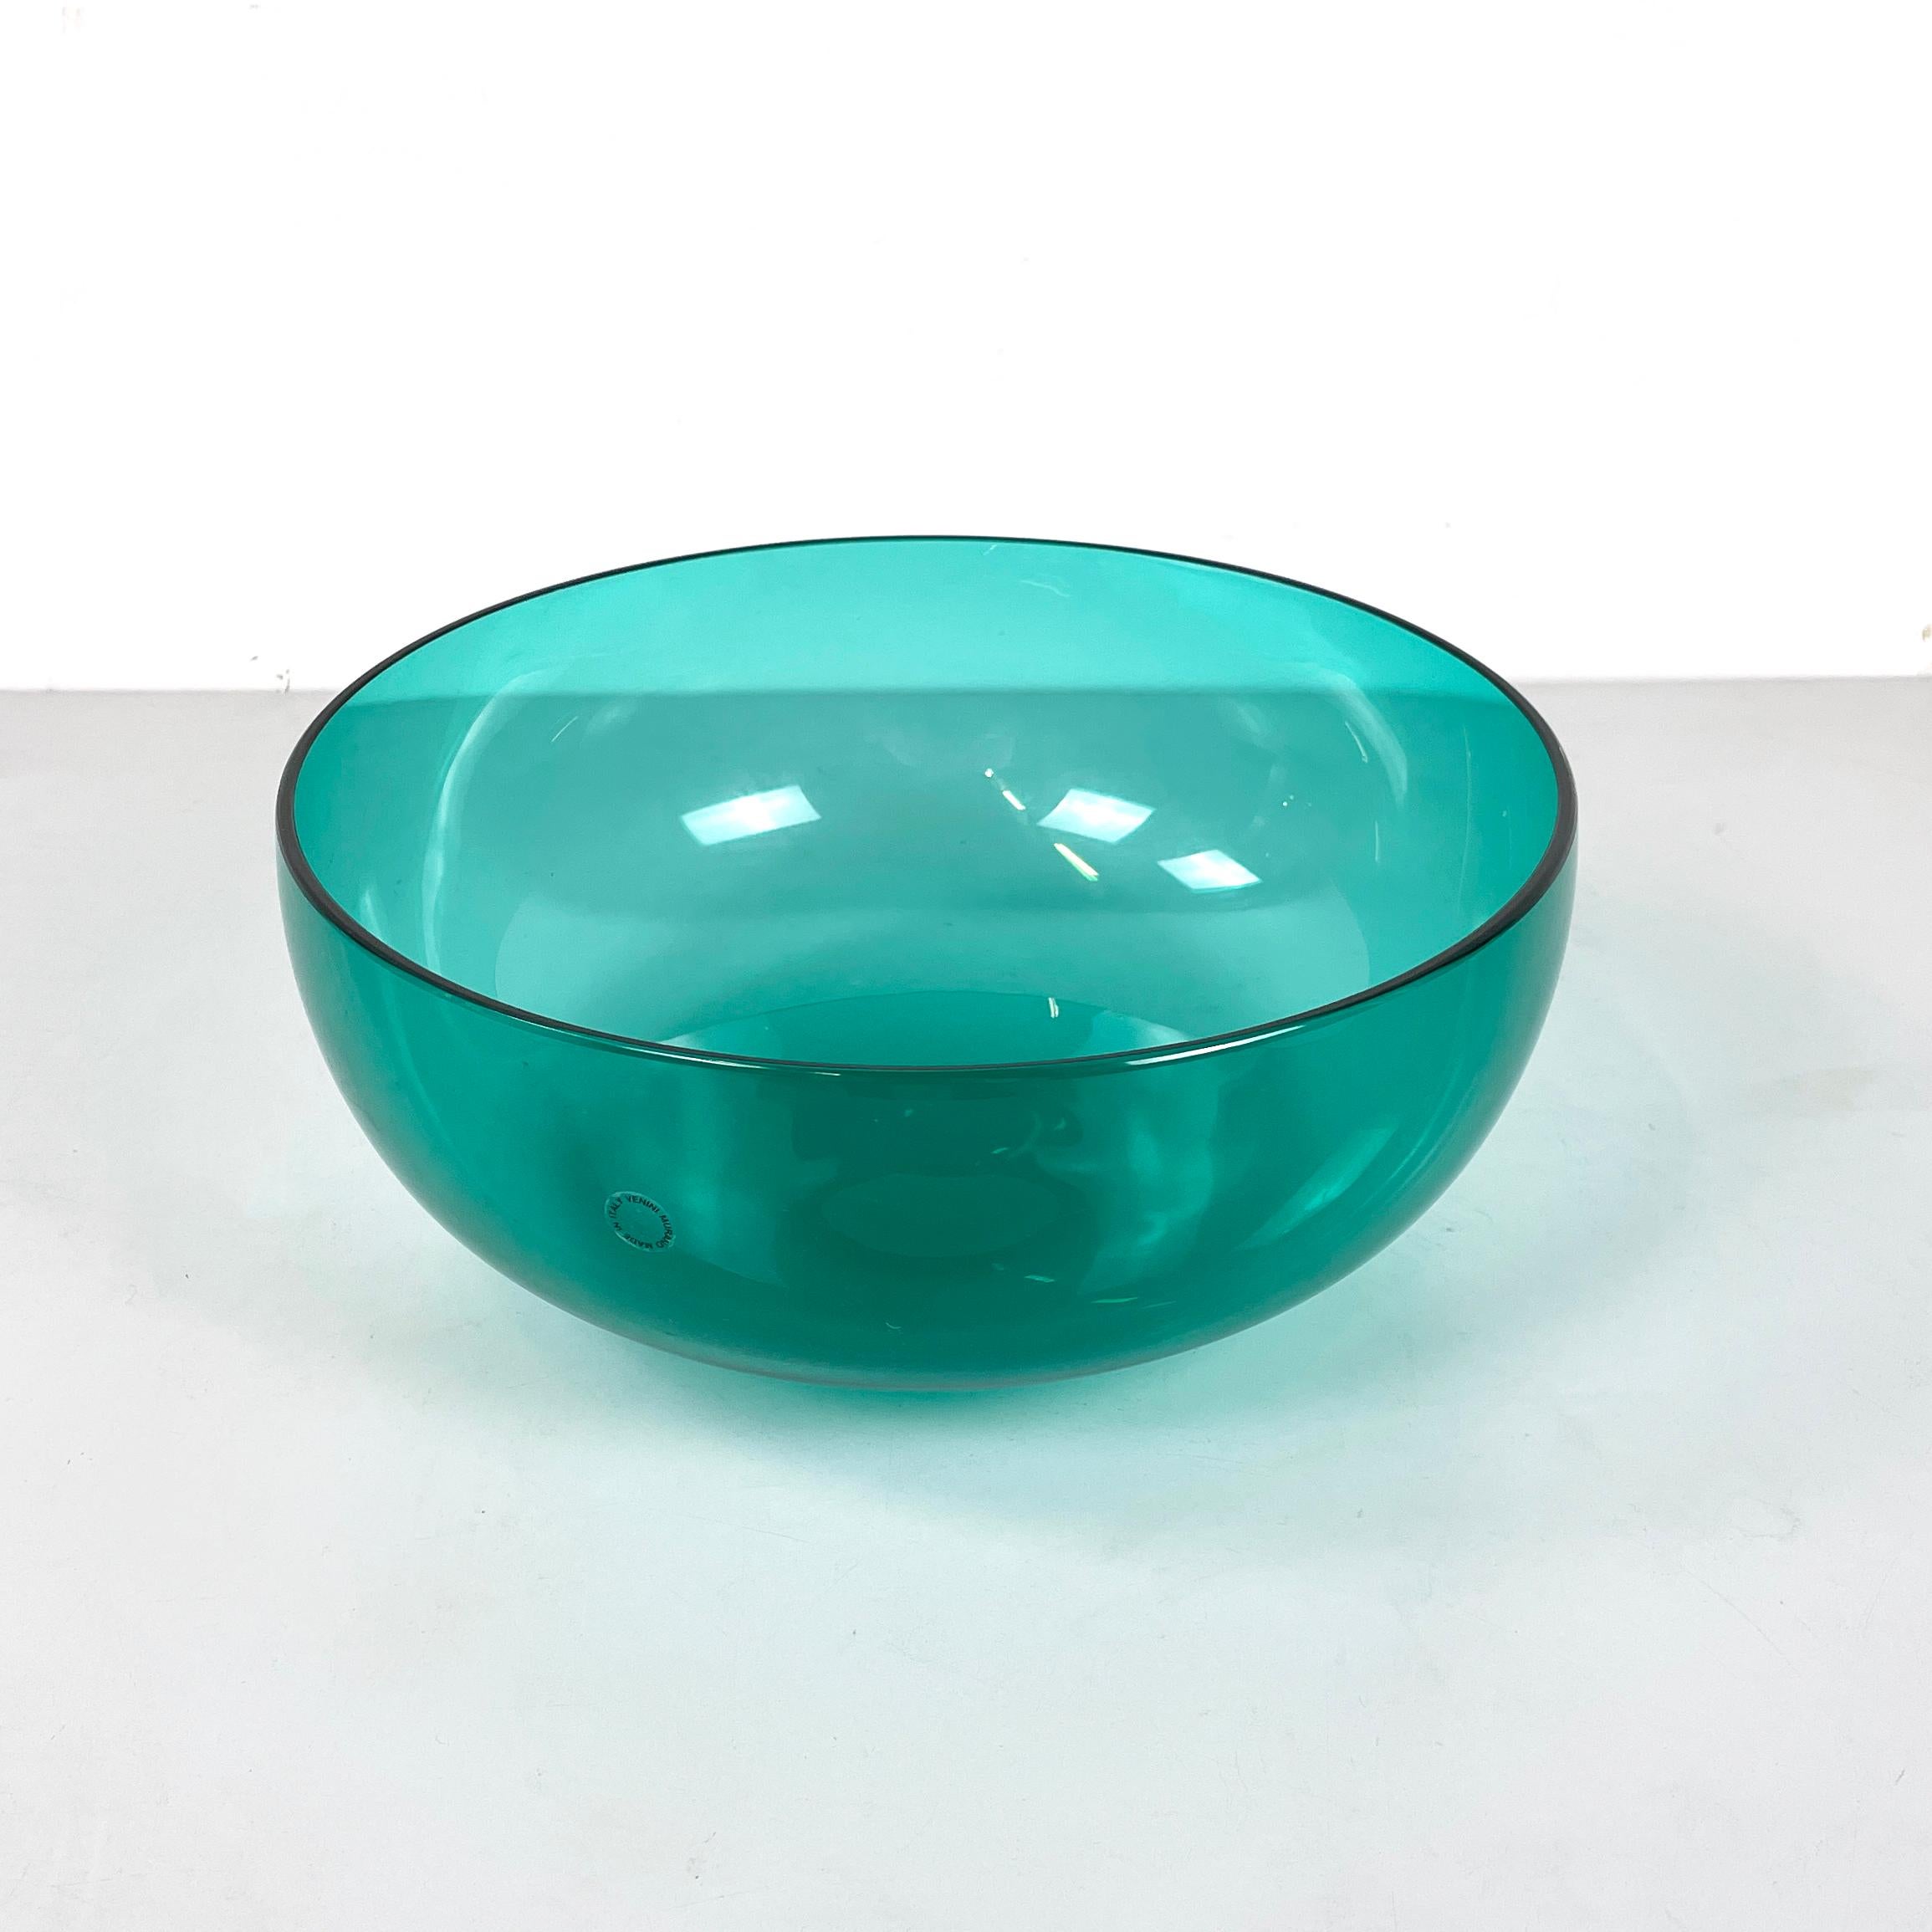 Italian modern Decorative bowl in green light blue Murano glass by Venini, 1990s
Decorative bowl with a round base in light blue aqua-green Murano glass. Perfect as a centerpiece or pocket emptier.
Produced by Venini in 1990. Label present.
Very